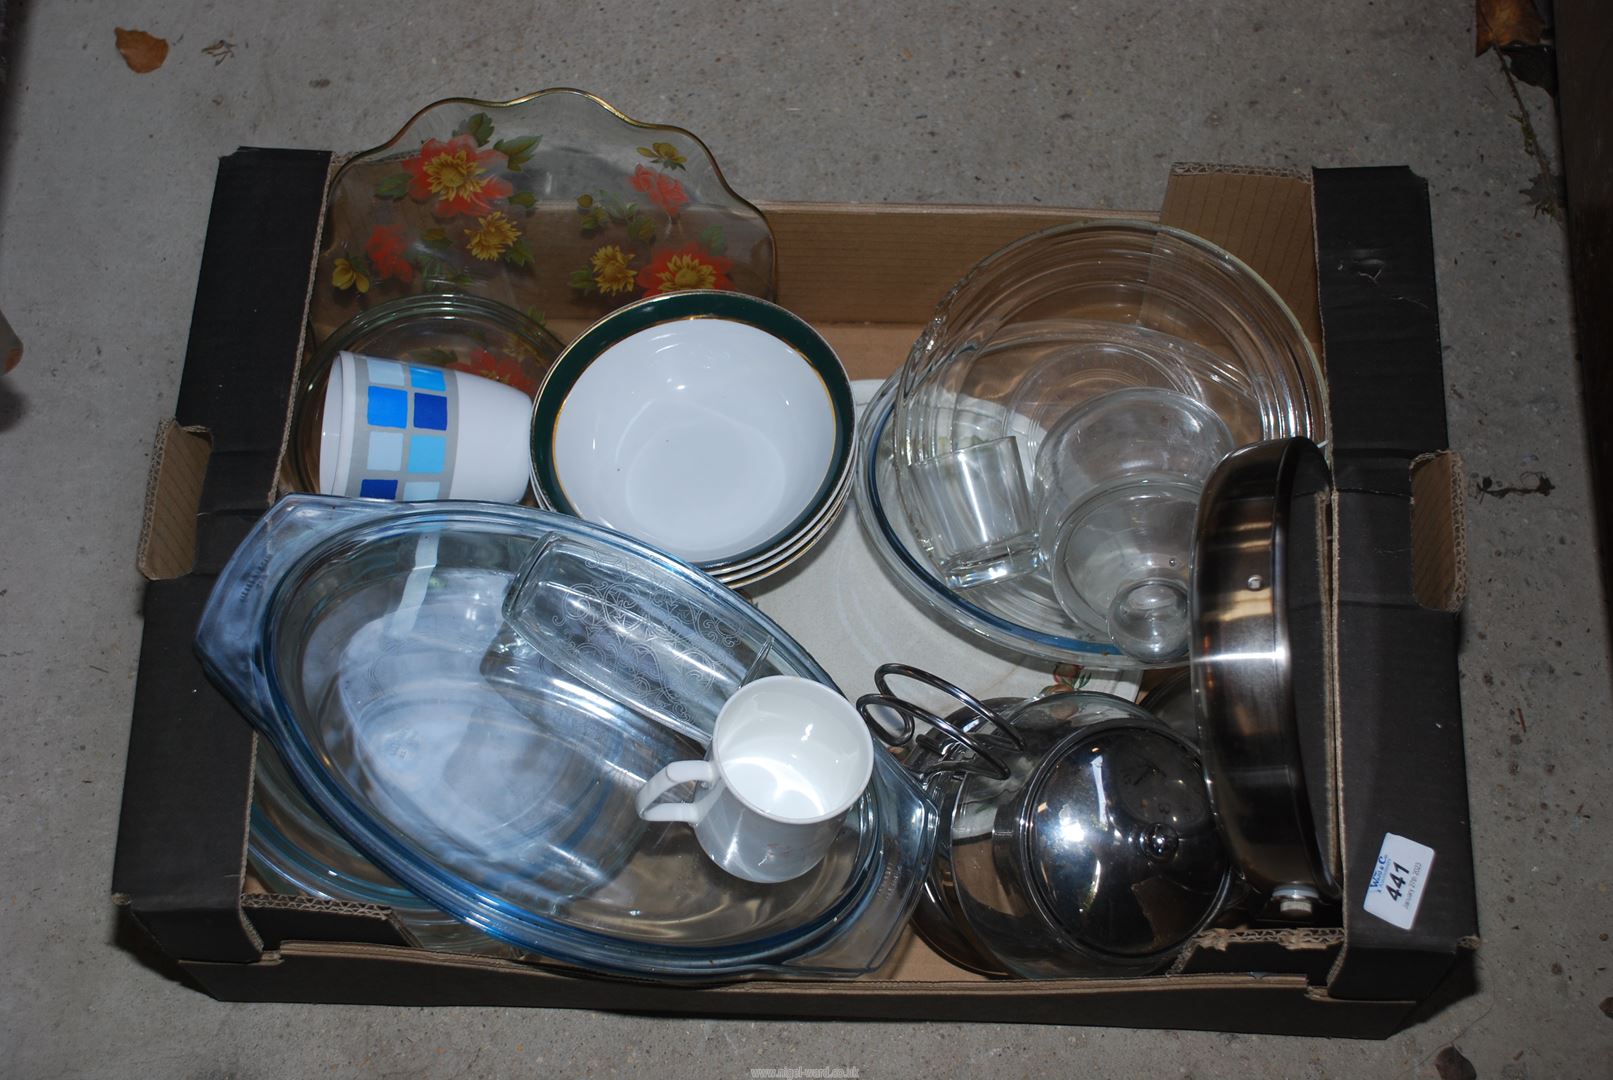 Stainless steel items, Pyrex dishes and glass.